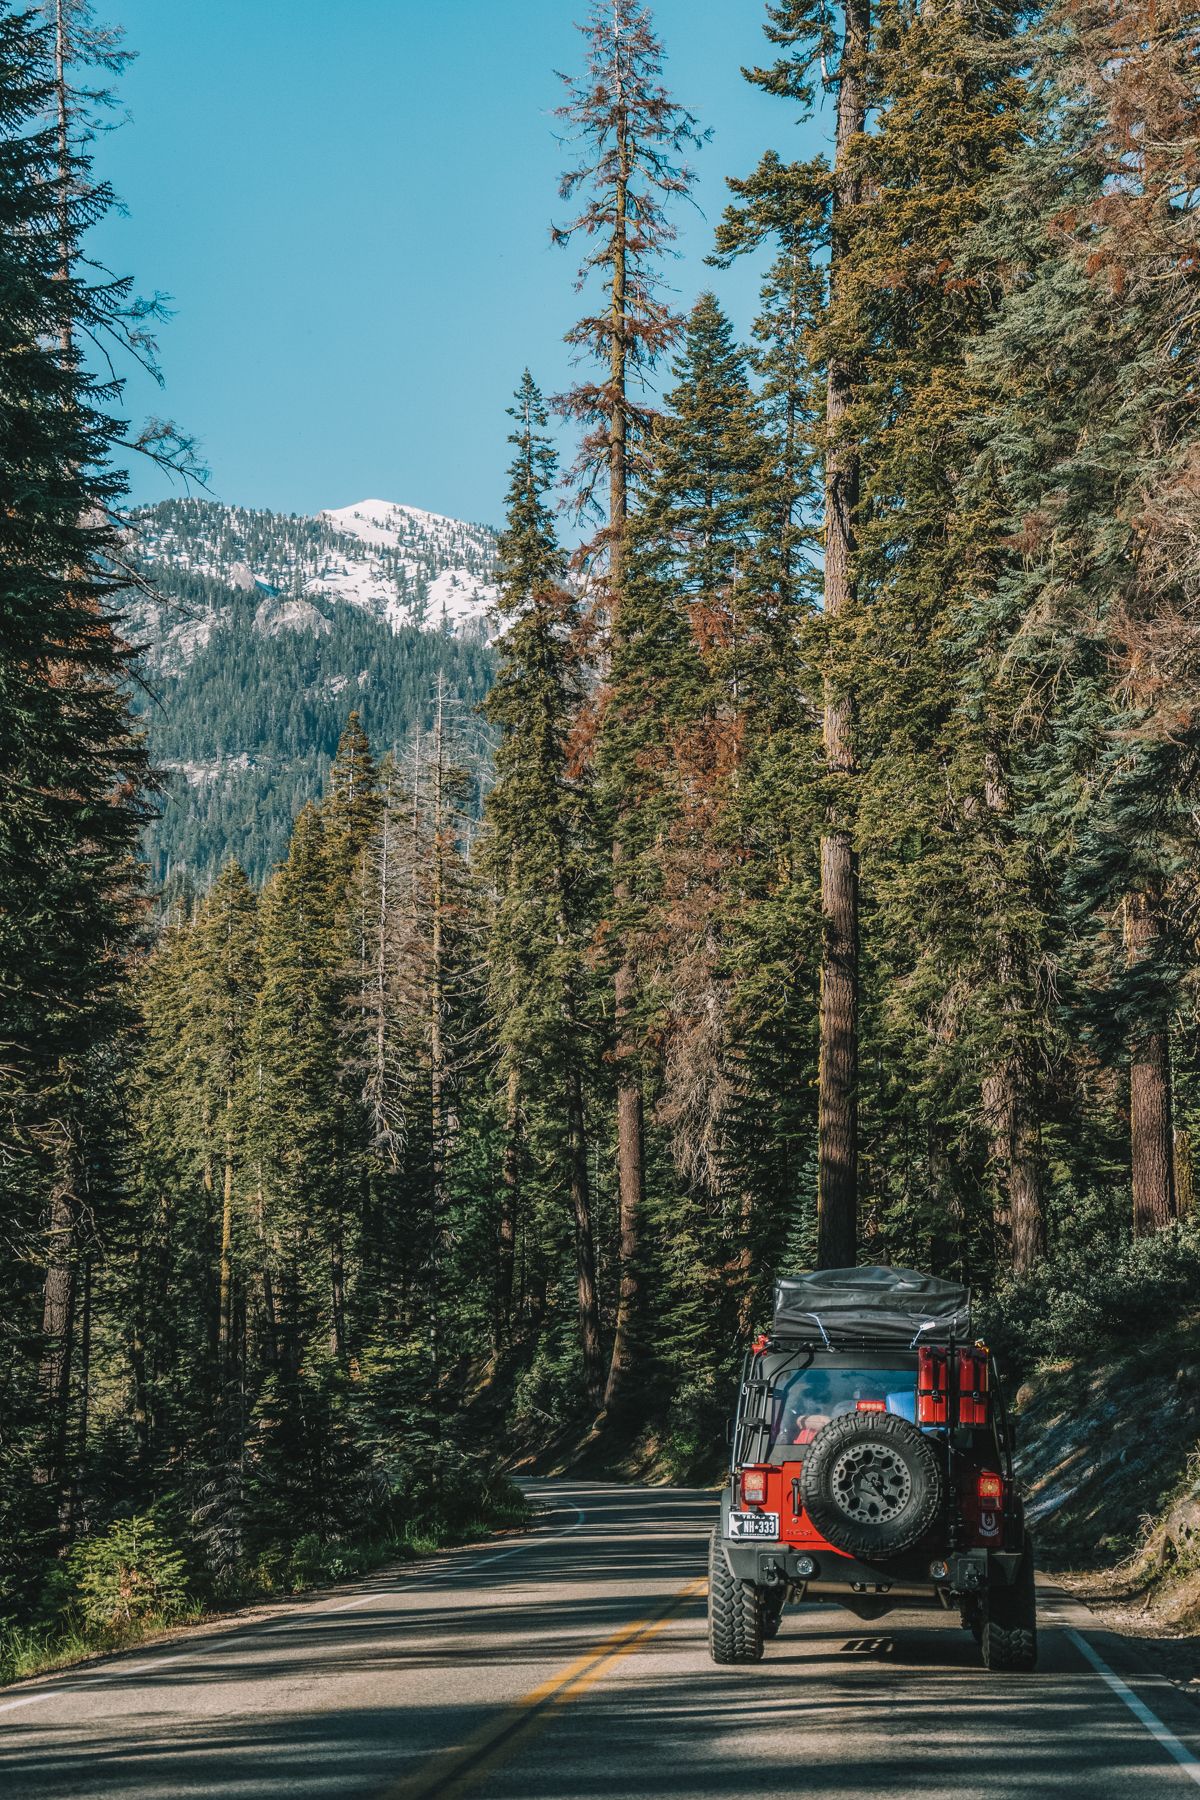 A jeep driving down a road through a forest, with a snowy peak in the distance.